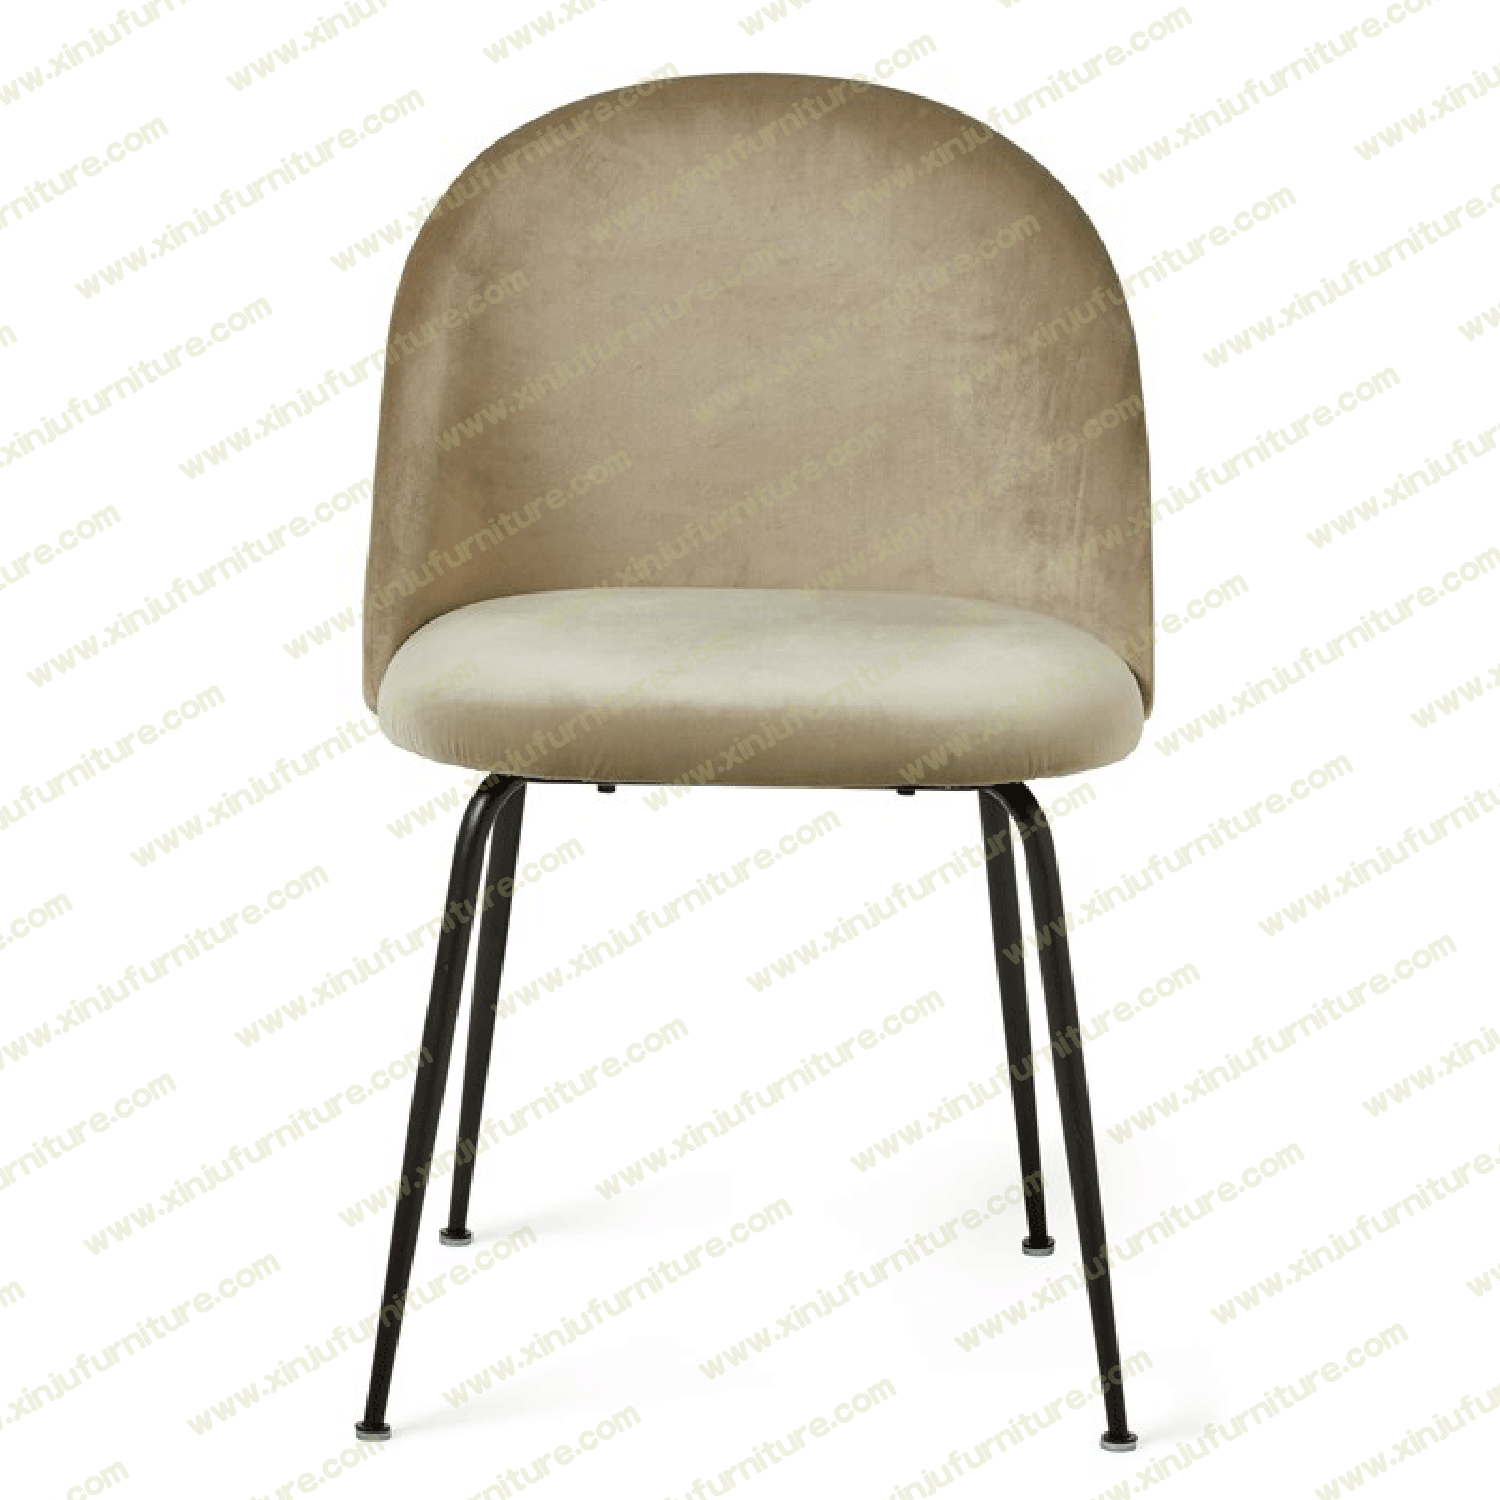 Tufted comfortable dining chair Beige